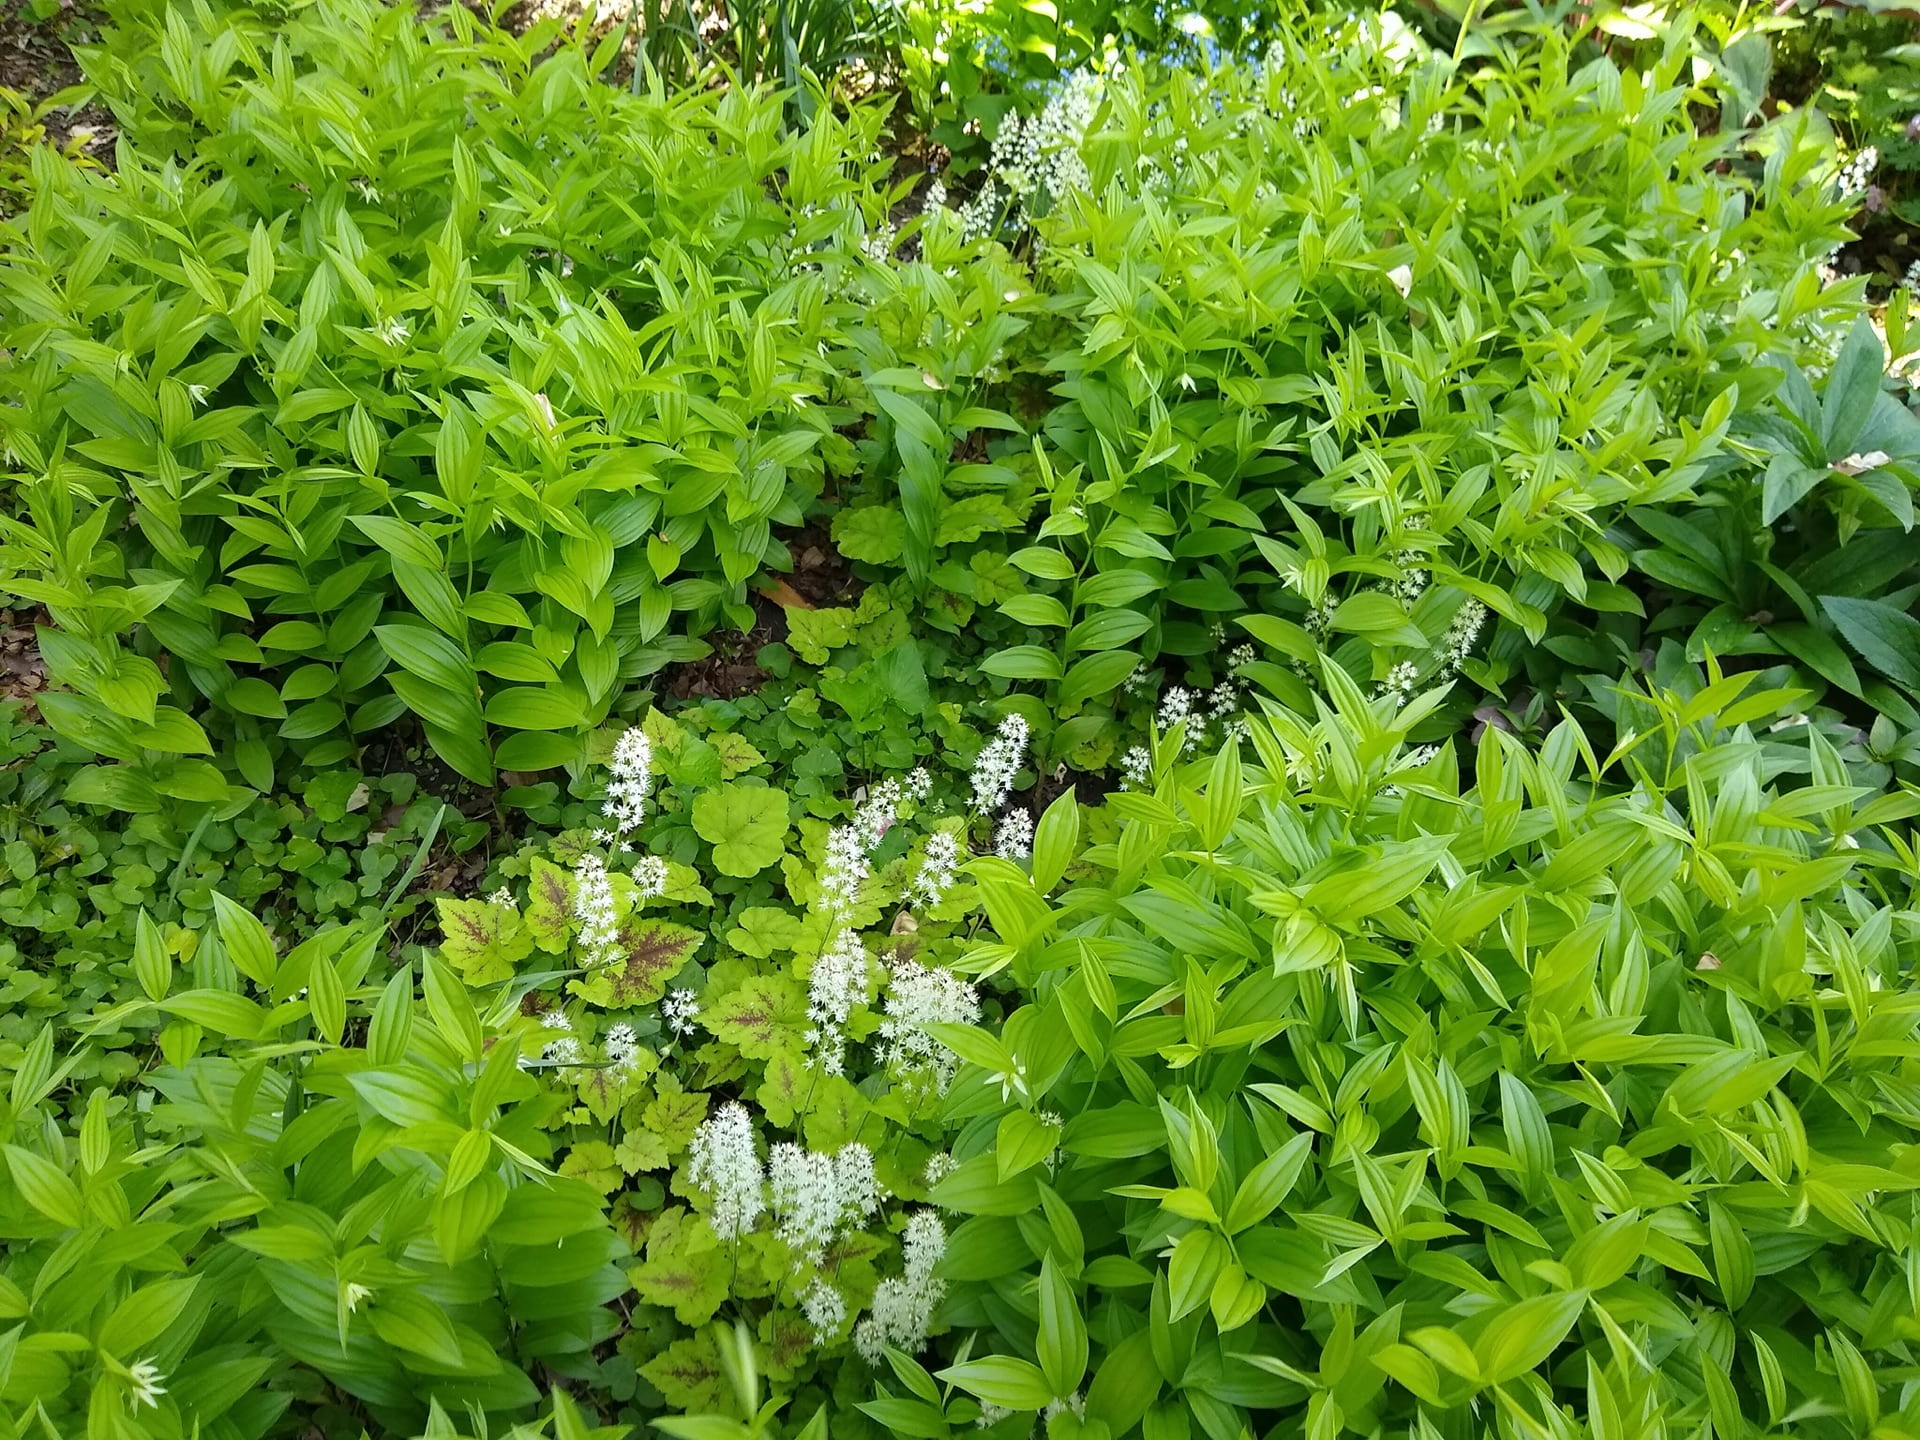 A tapestry of Tiarella cordifolia and Maianthemum stellatum thrives in the shade.